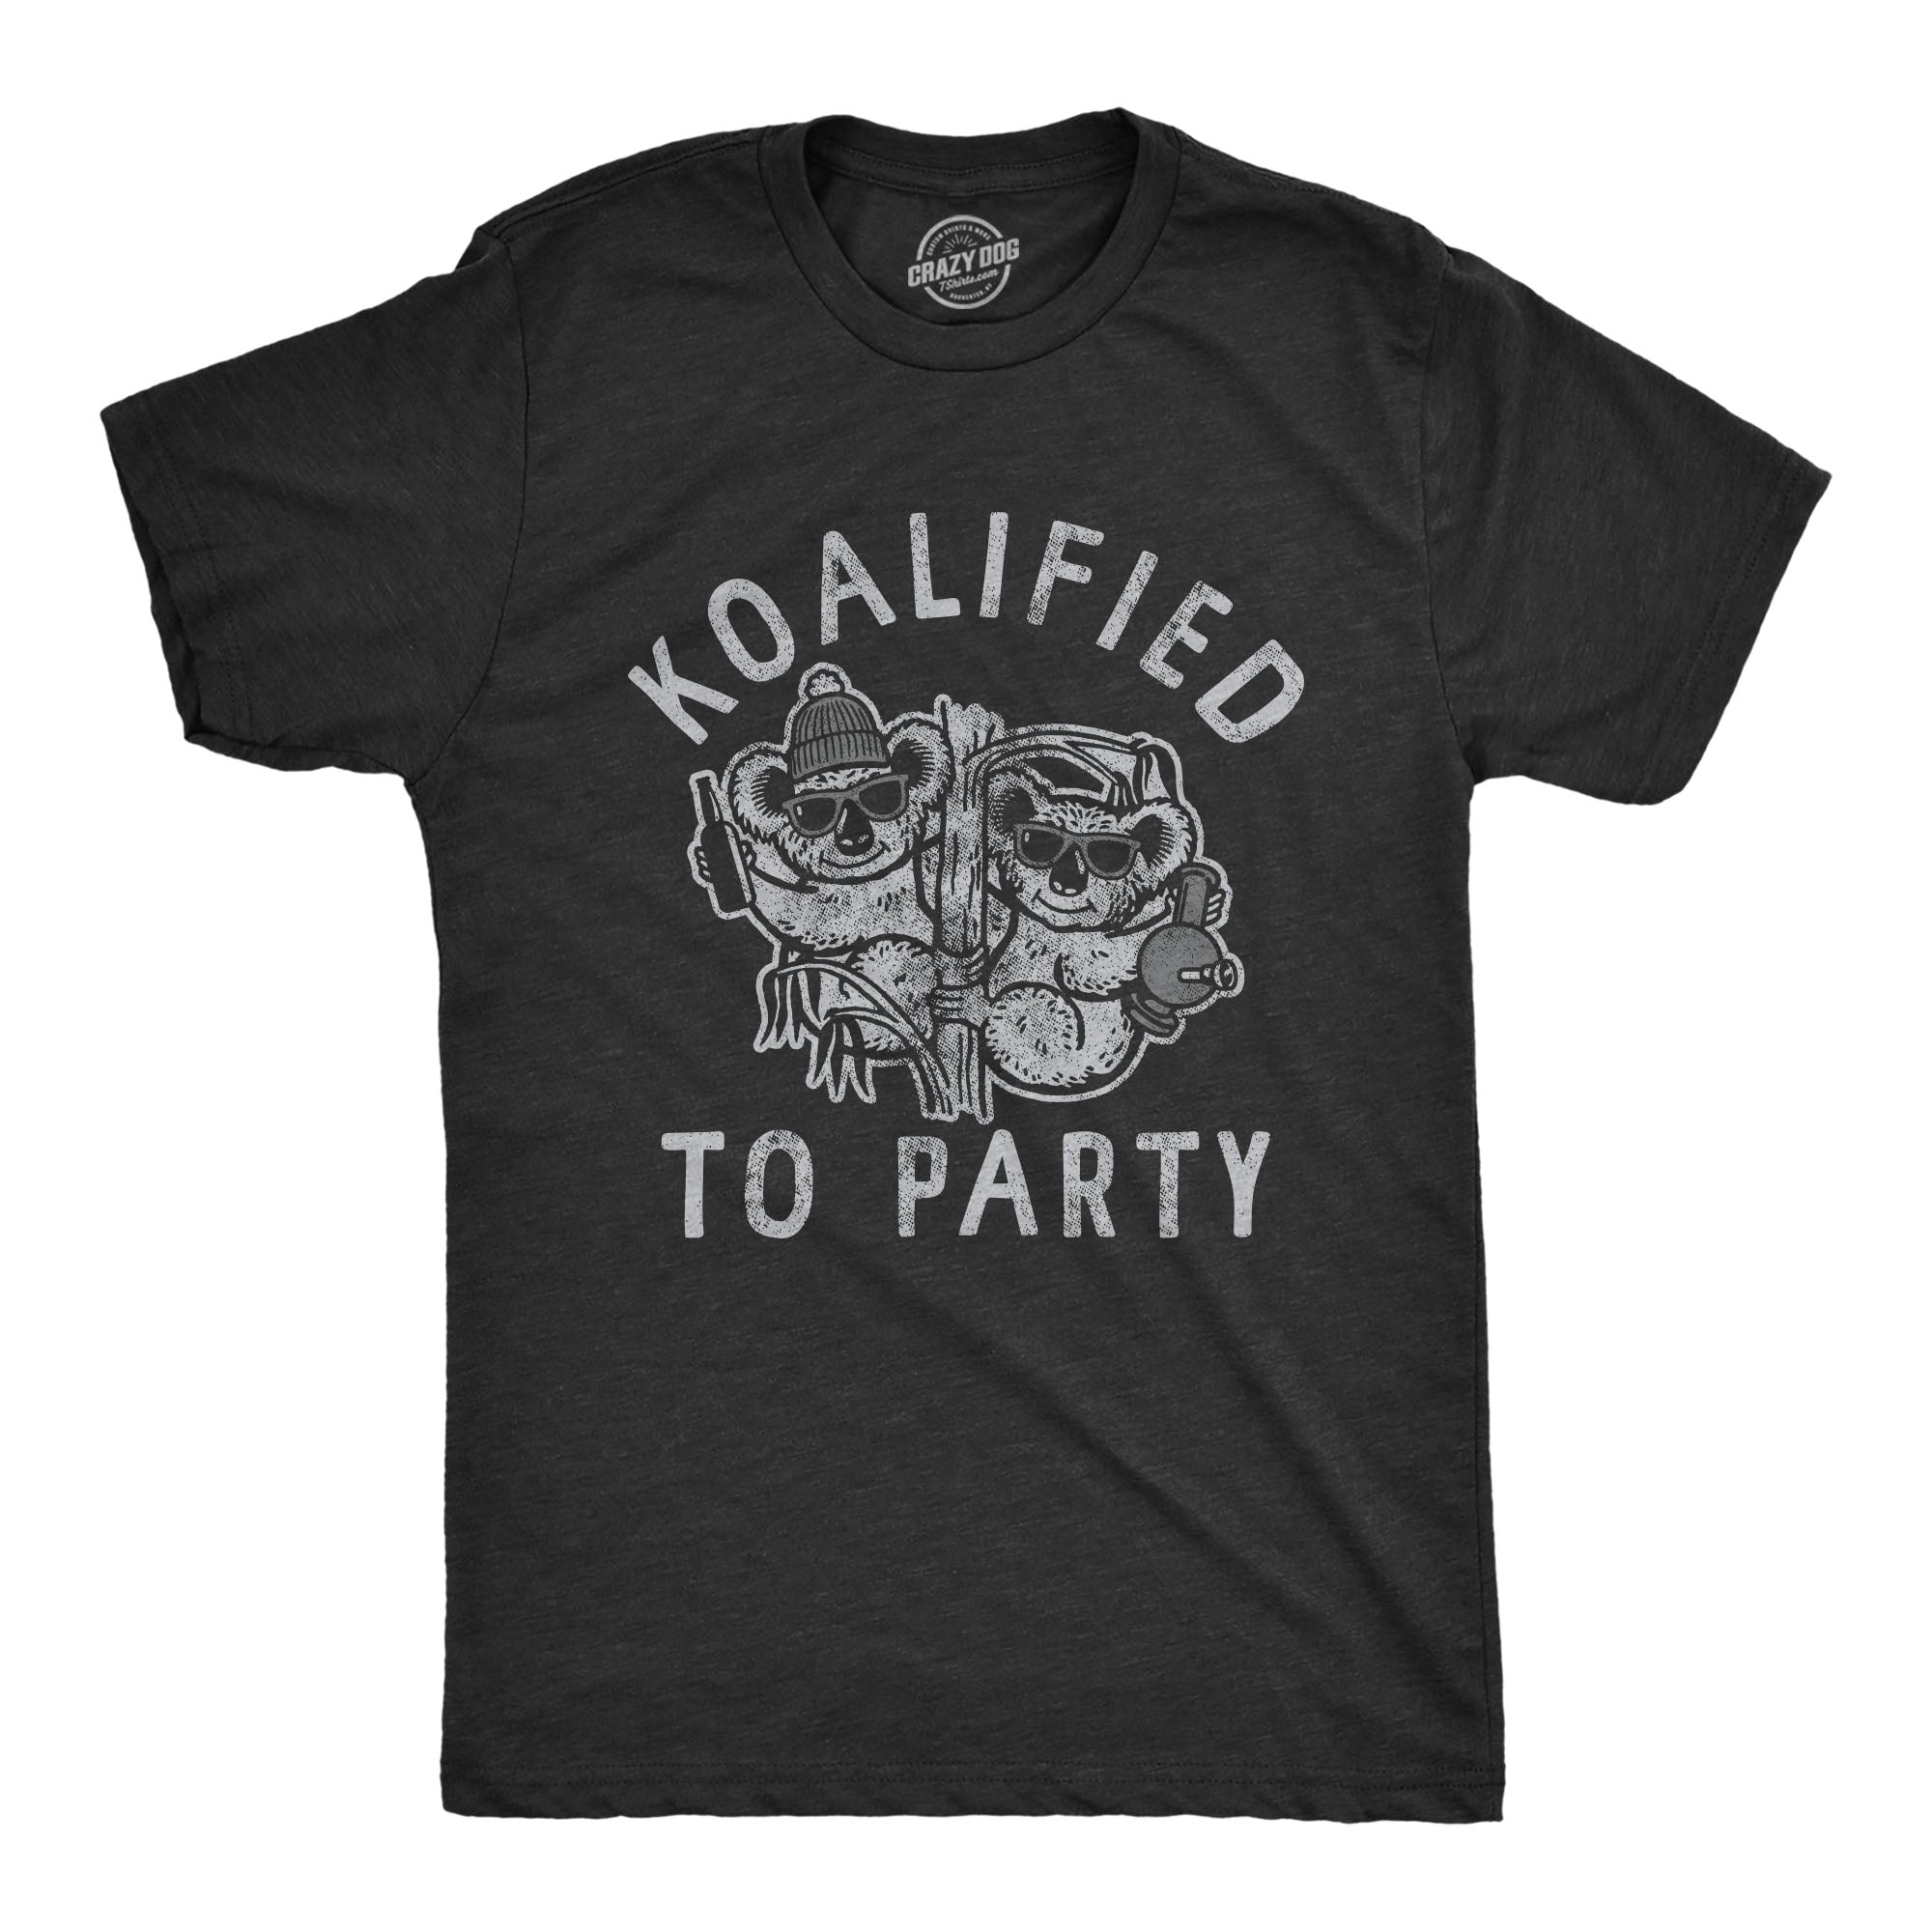 Funny Heather Black Koalified To Party Mens T Shirt Nerdy 420 Drinking Drinking Tee